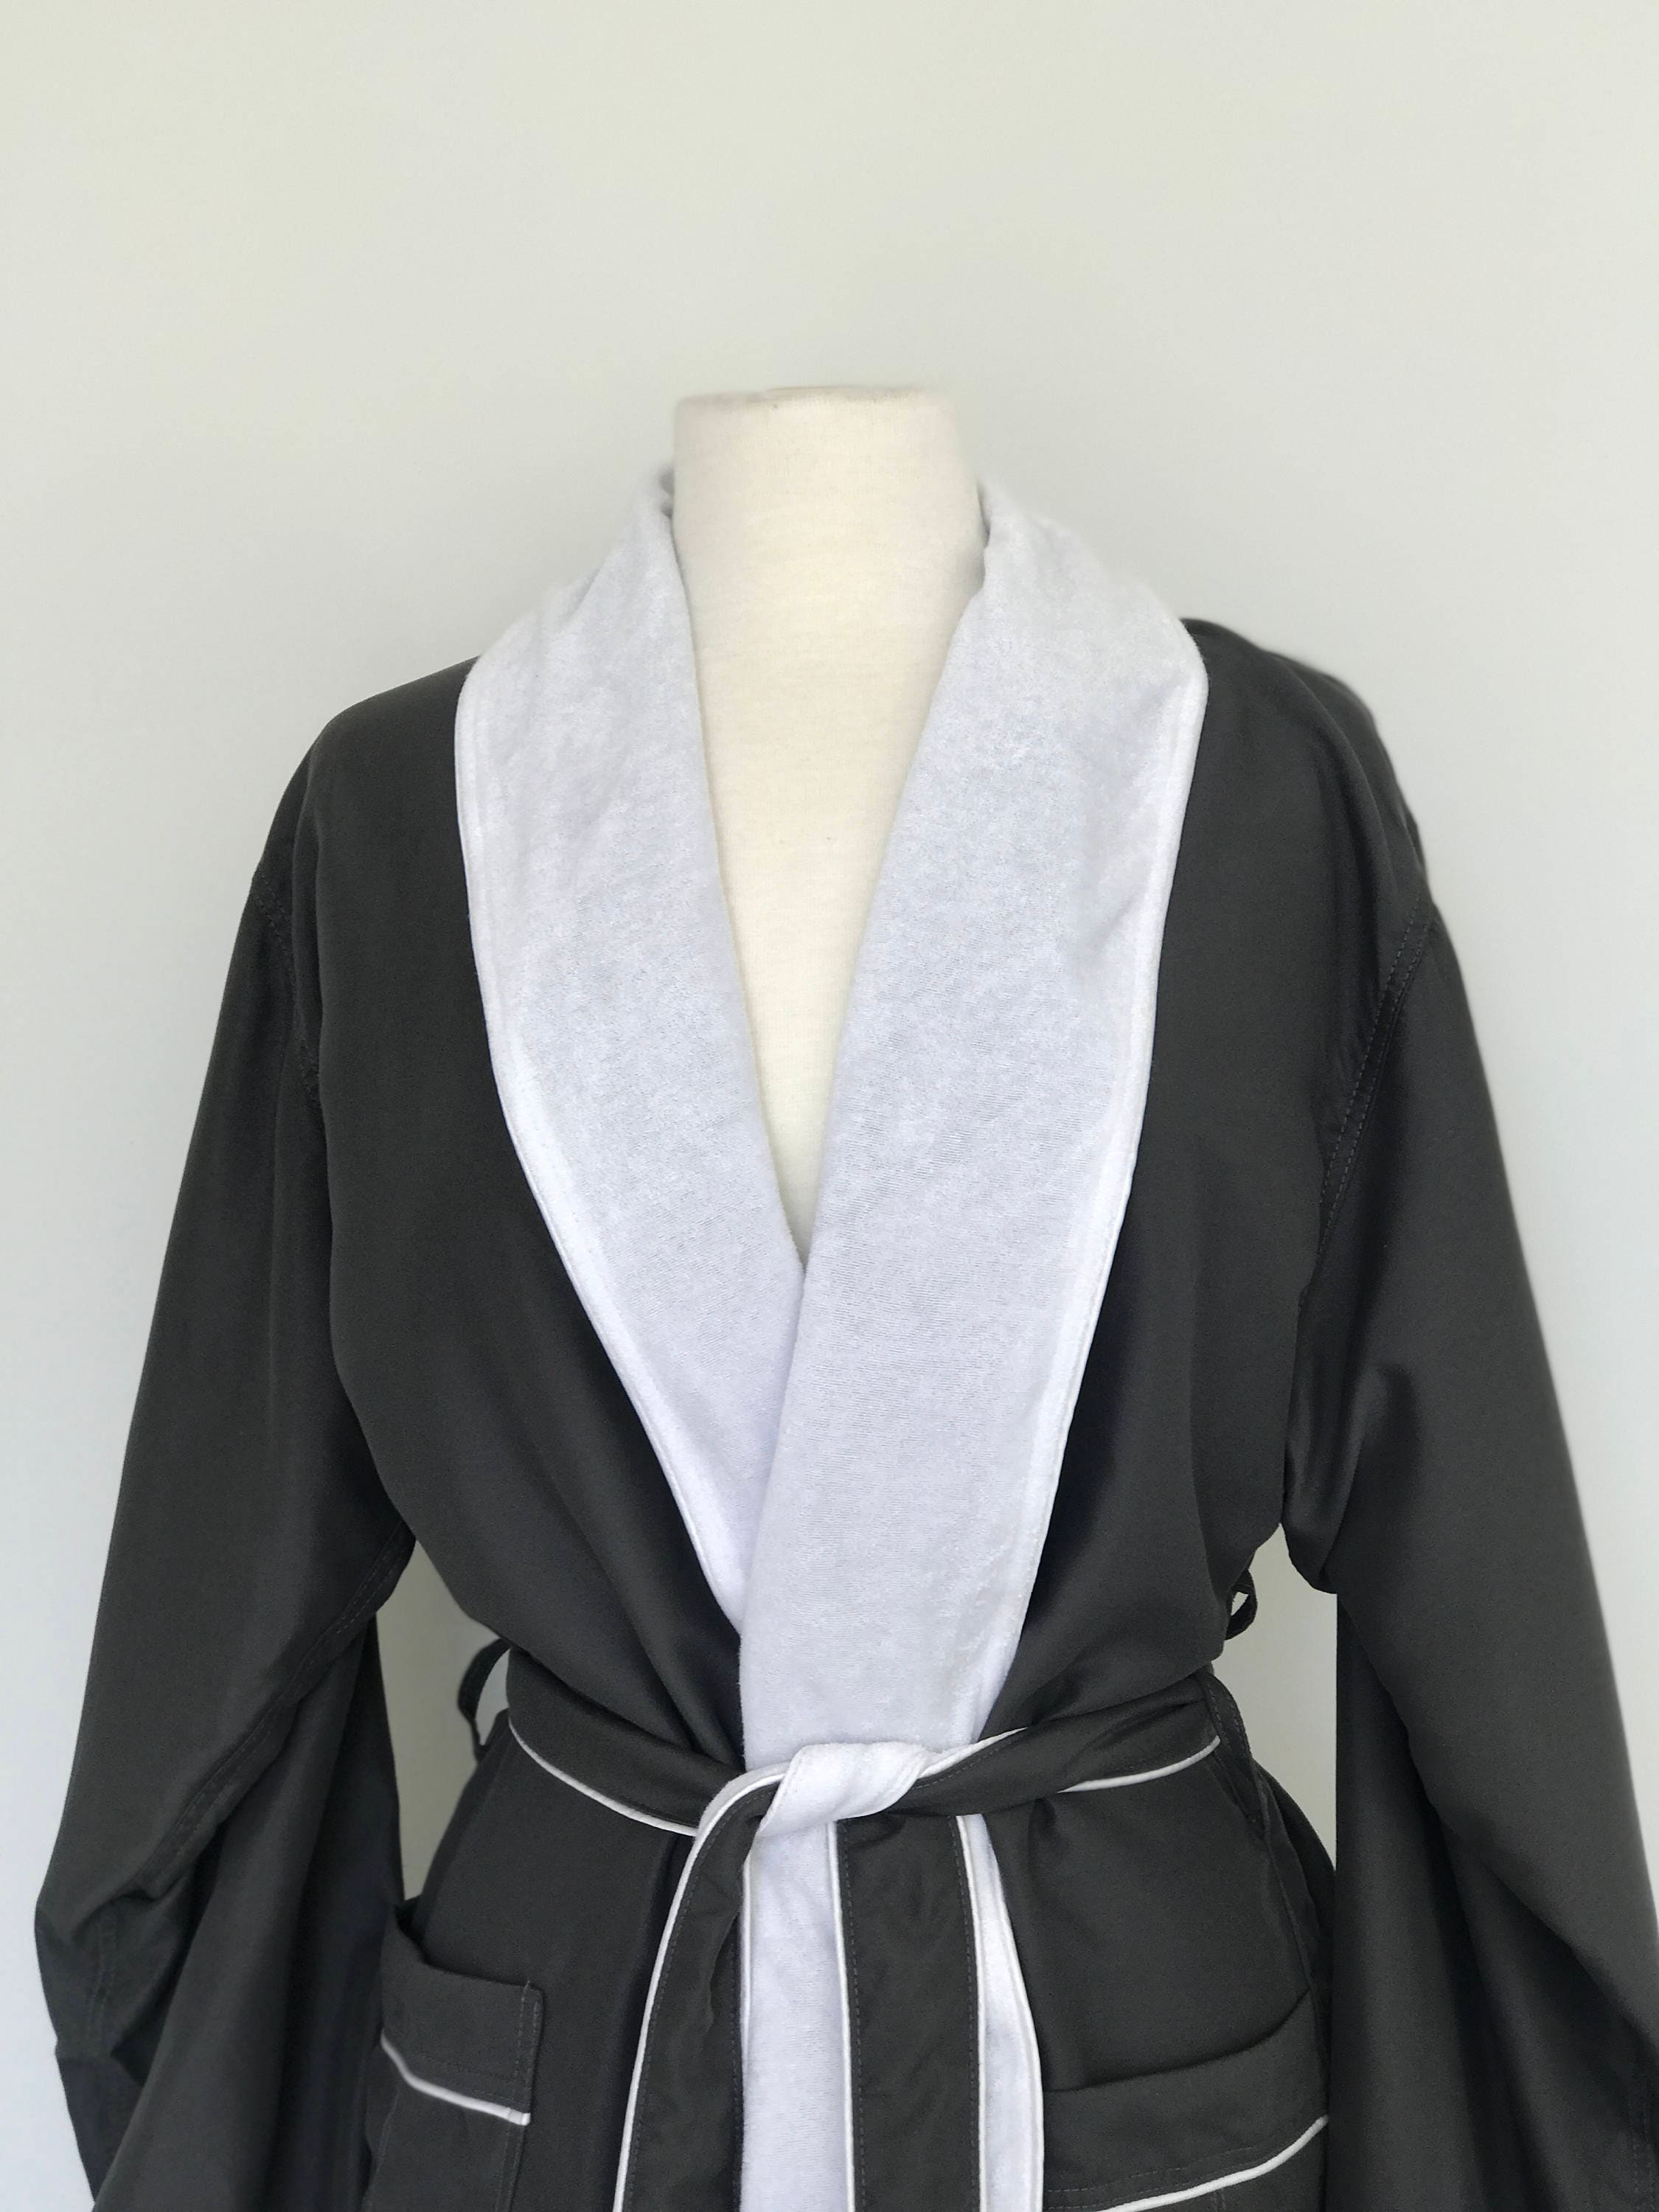 CHARCOAL GREY Spa Bathrobe His and Hers Mr. and Mrs He - Etsy